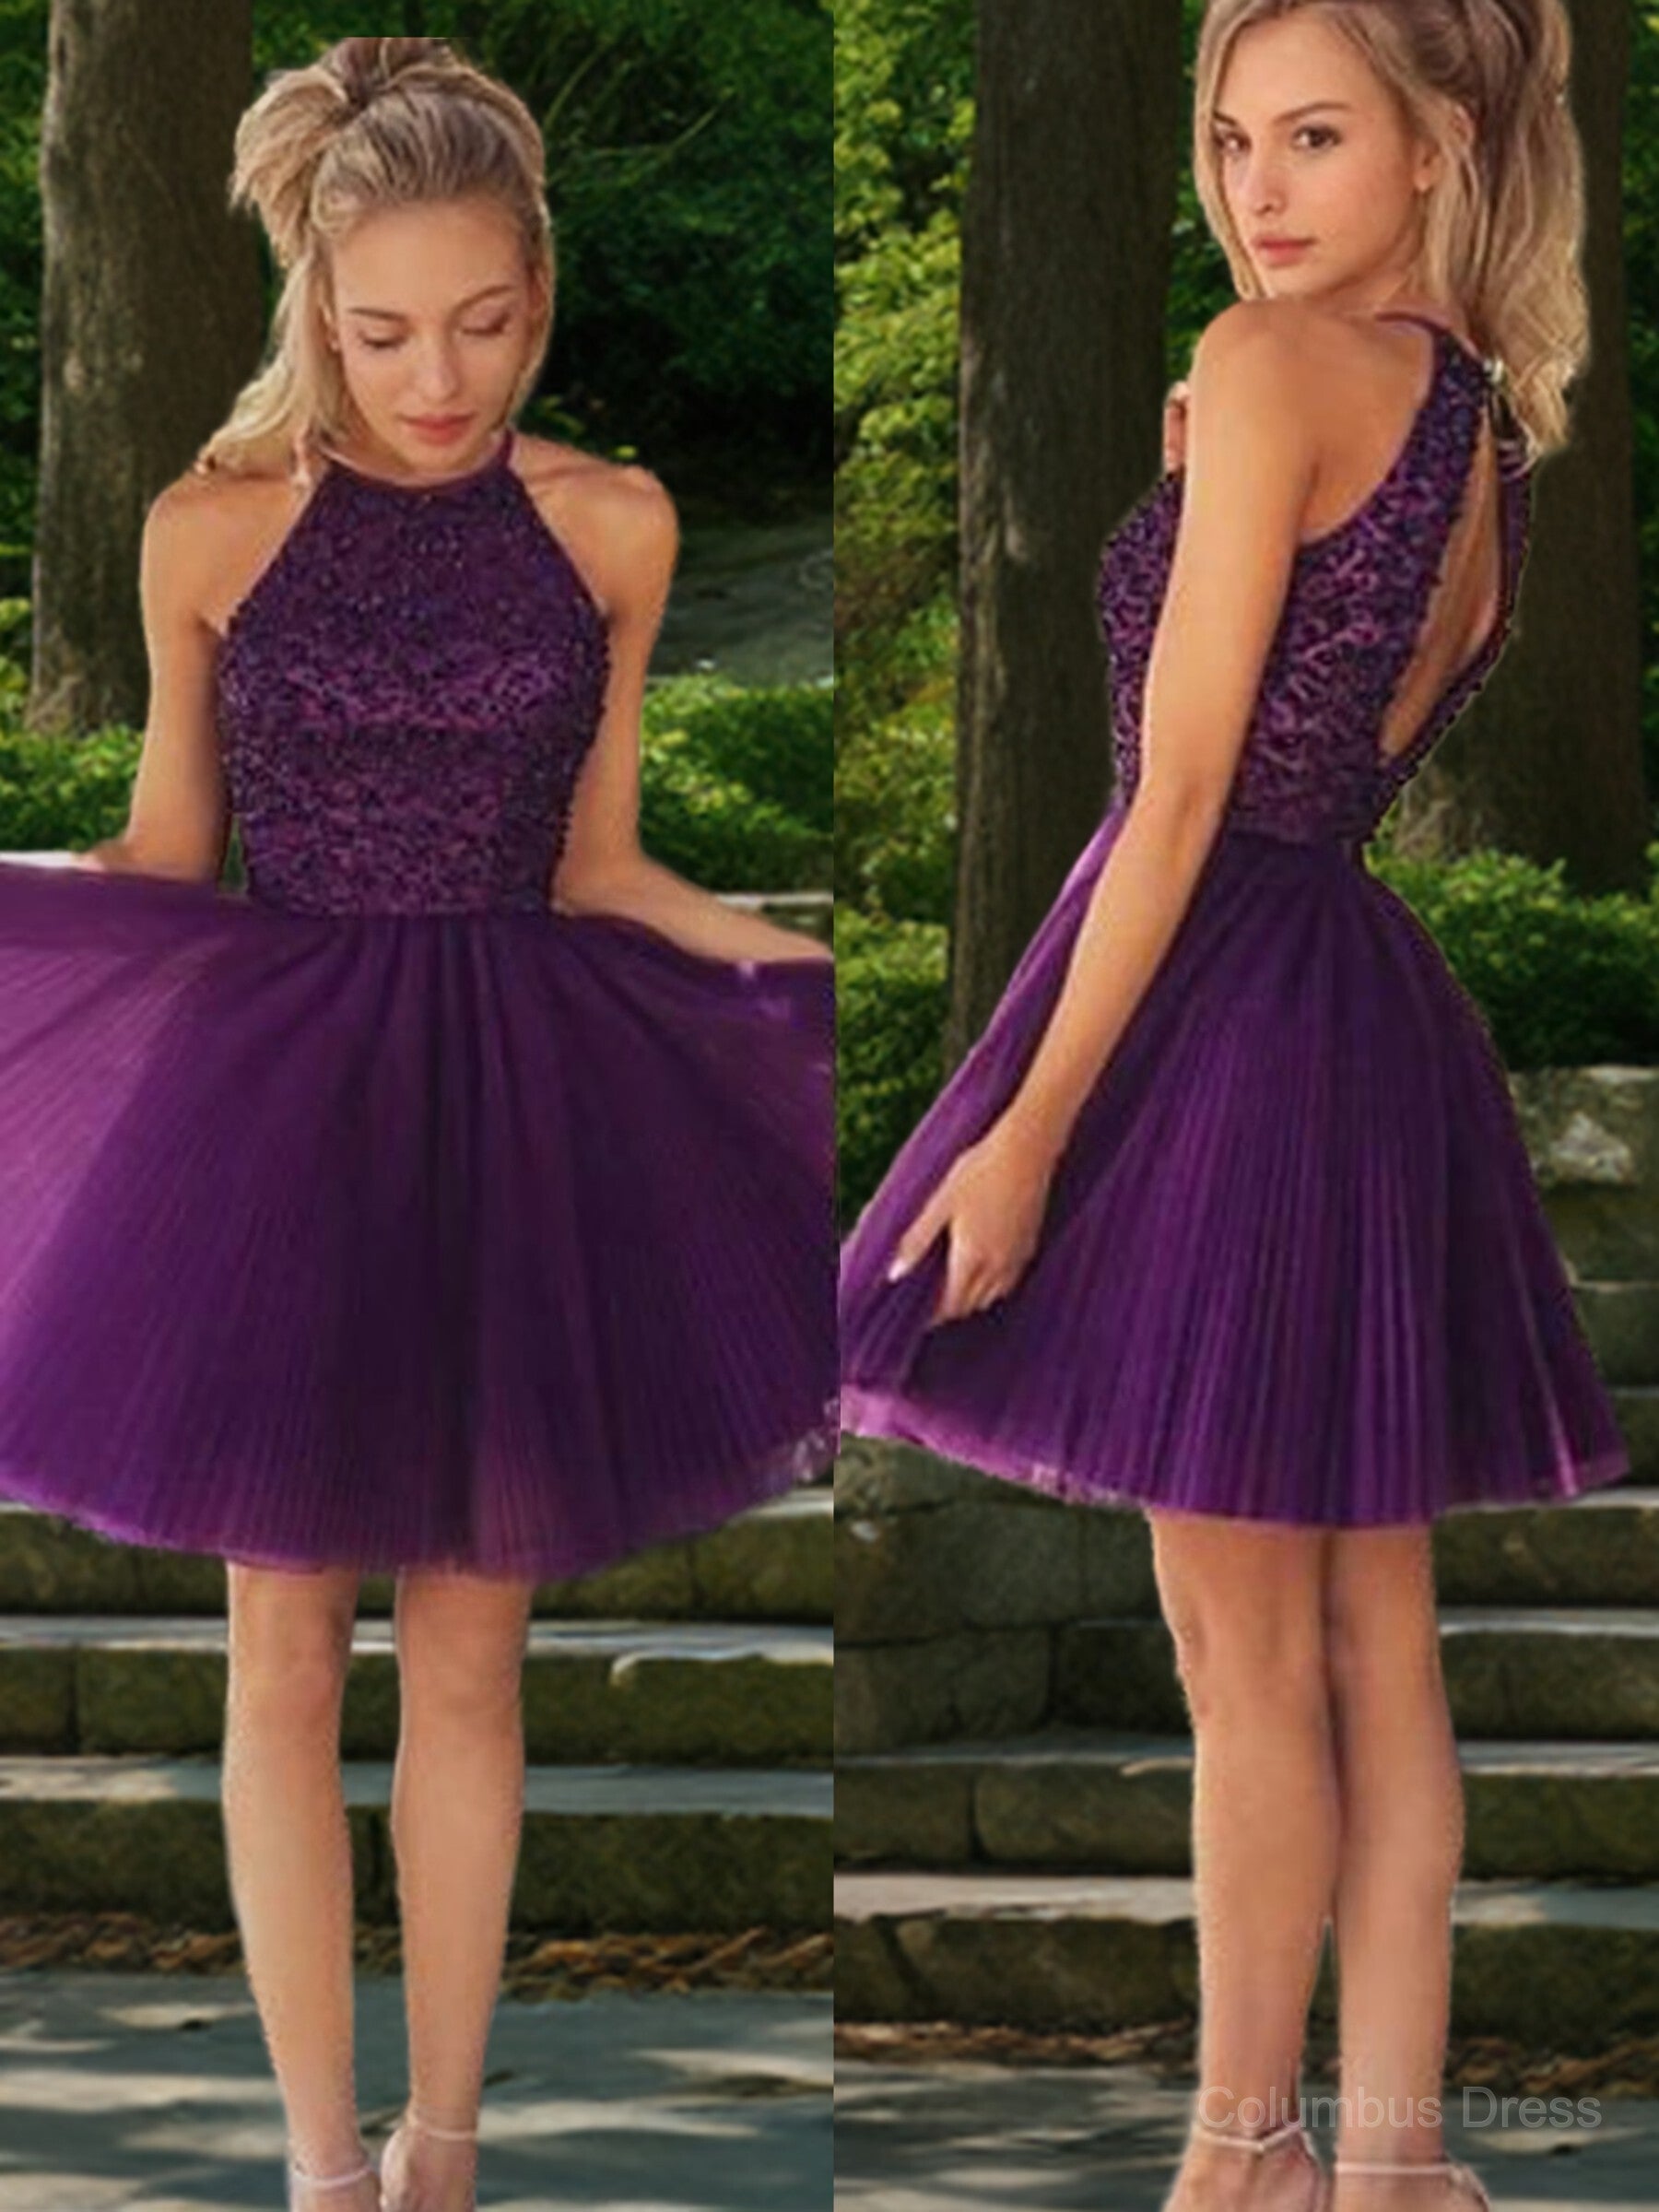 Prom Dress Bodycon, A-Line/Princess Halter Short/Mini Tulle Homecoming Dresses With Beading